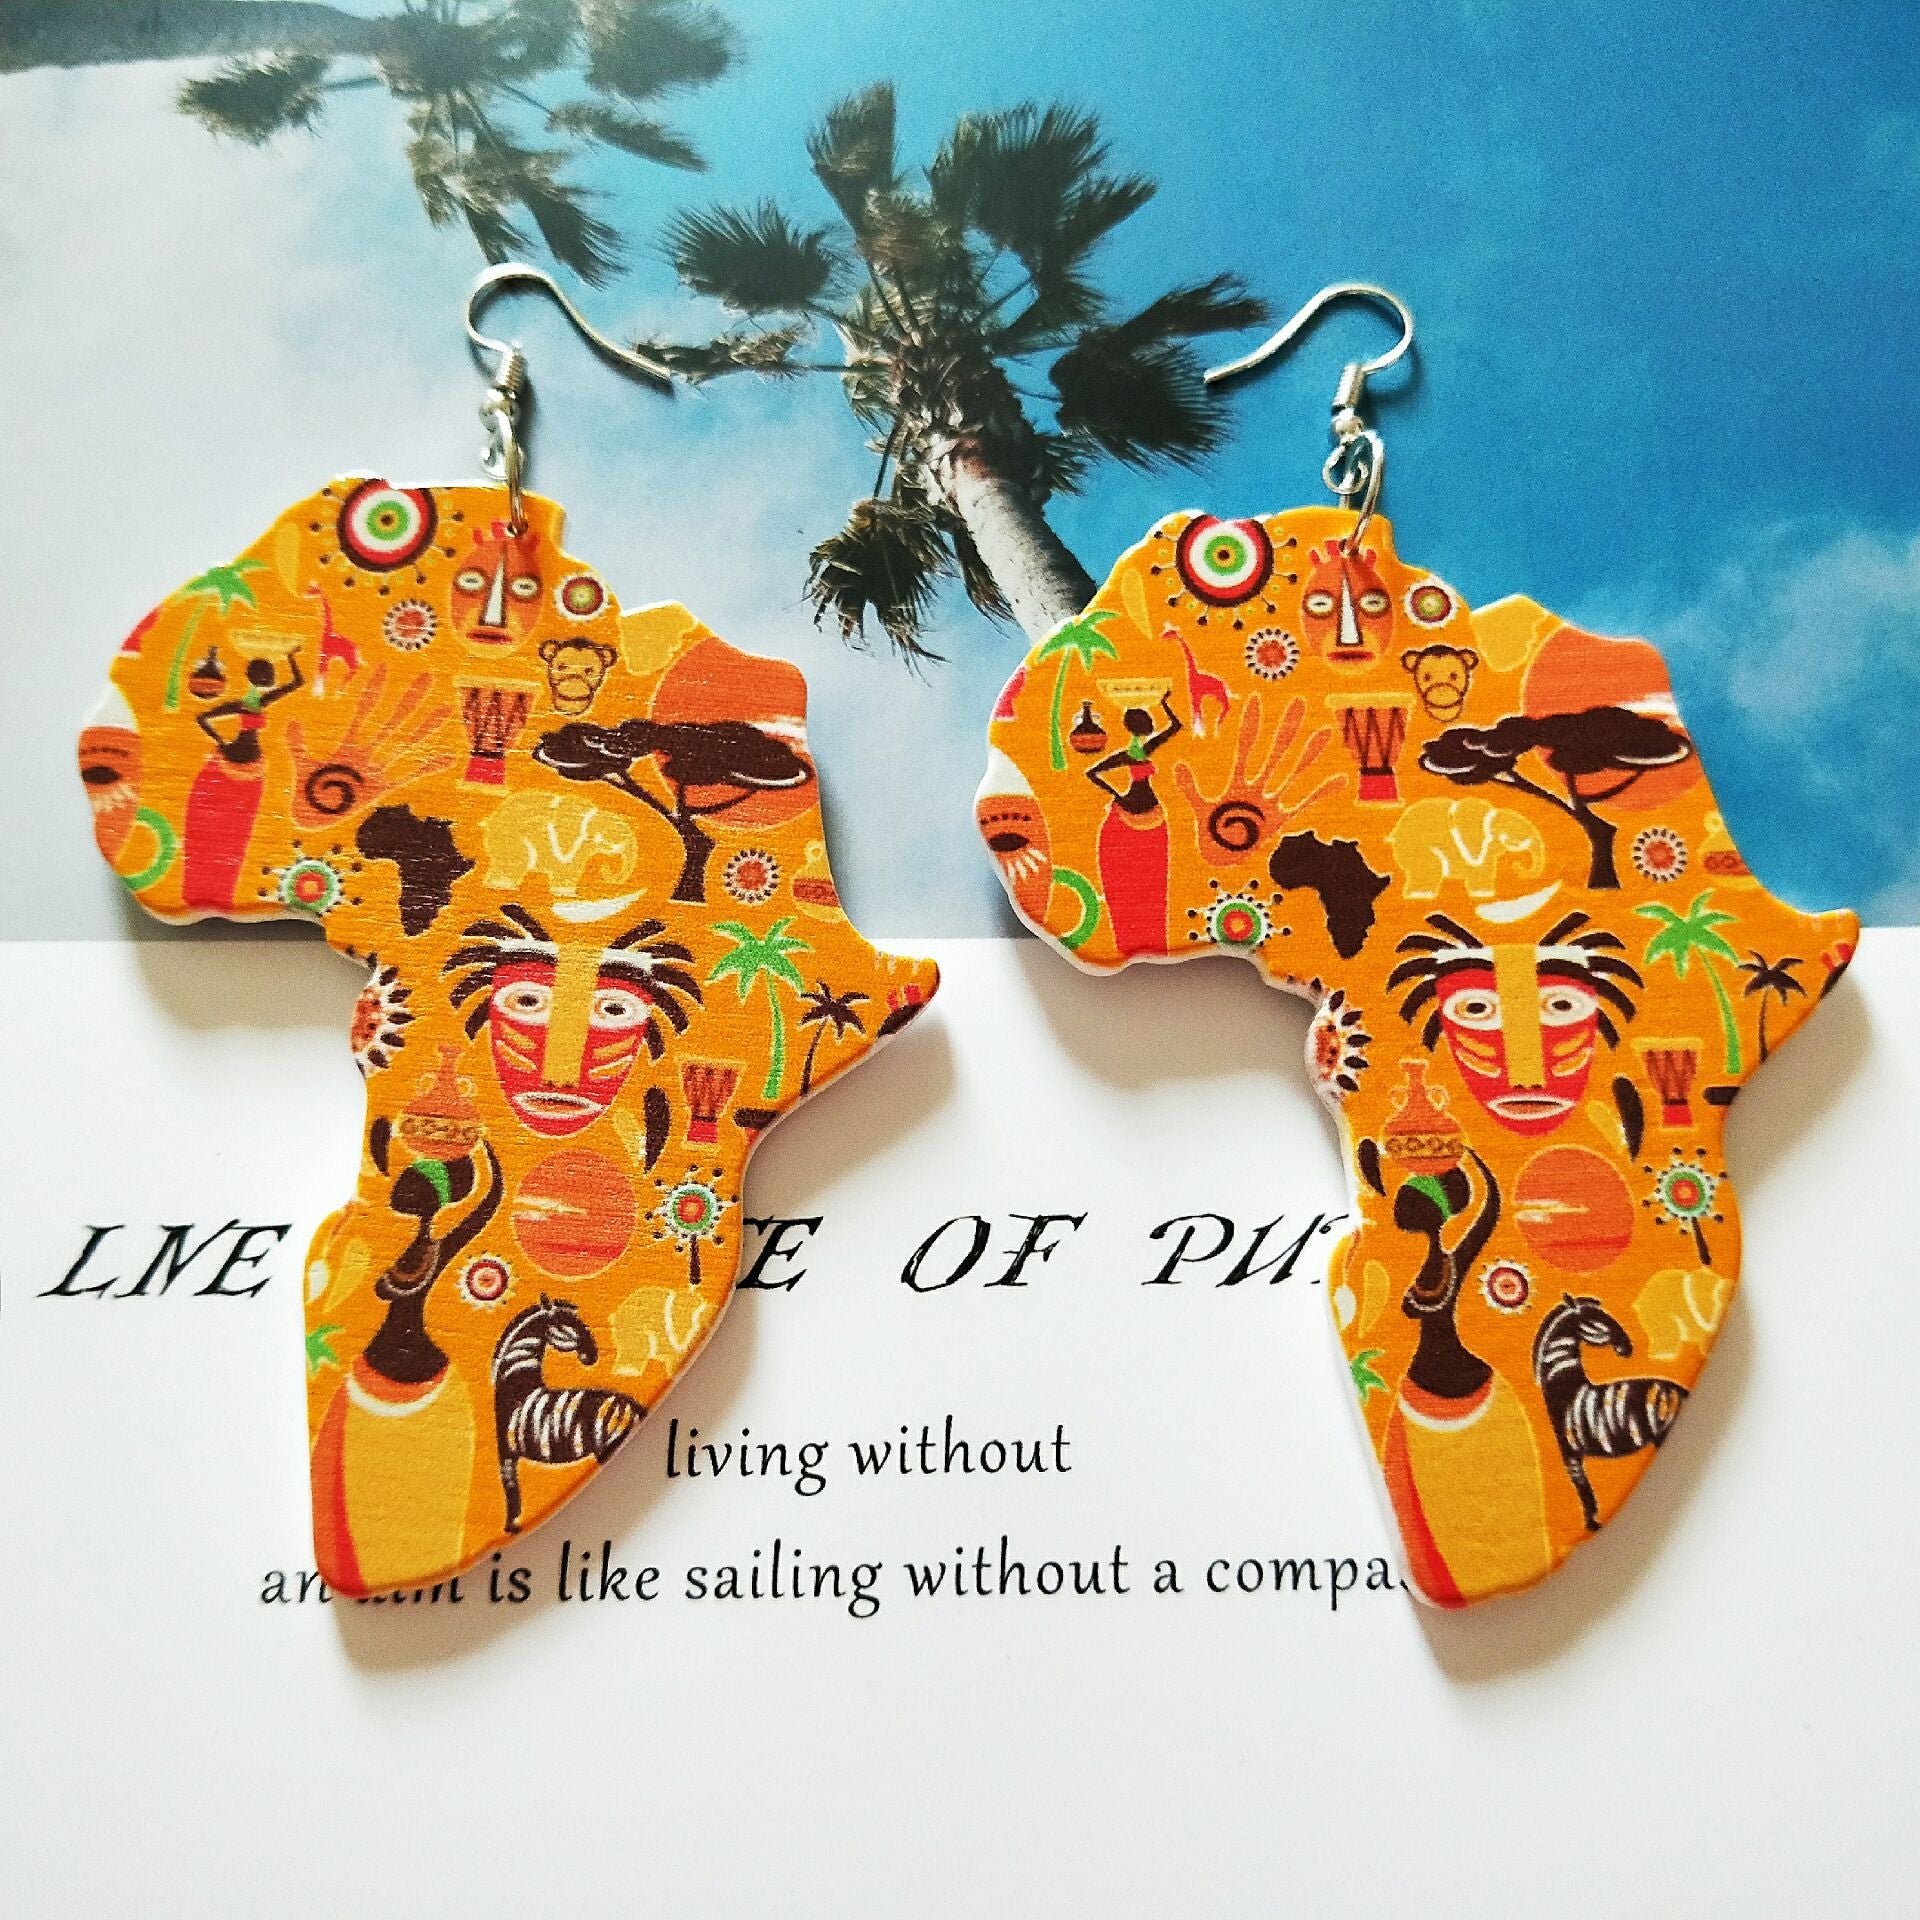 Vintage Heart Map Earrings - Handcrafted with Black Queen Wood - Flexi Africa - Flexi Africa offers Free Delivery Worldwide - Vibrant African traditional clothing showcasing bold prints and intricate designs